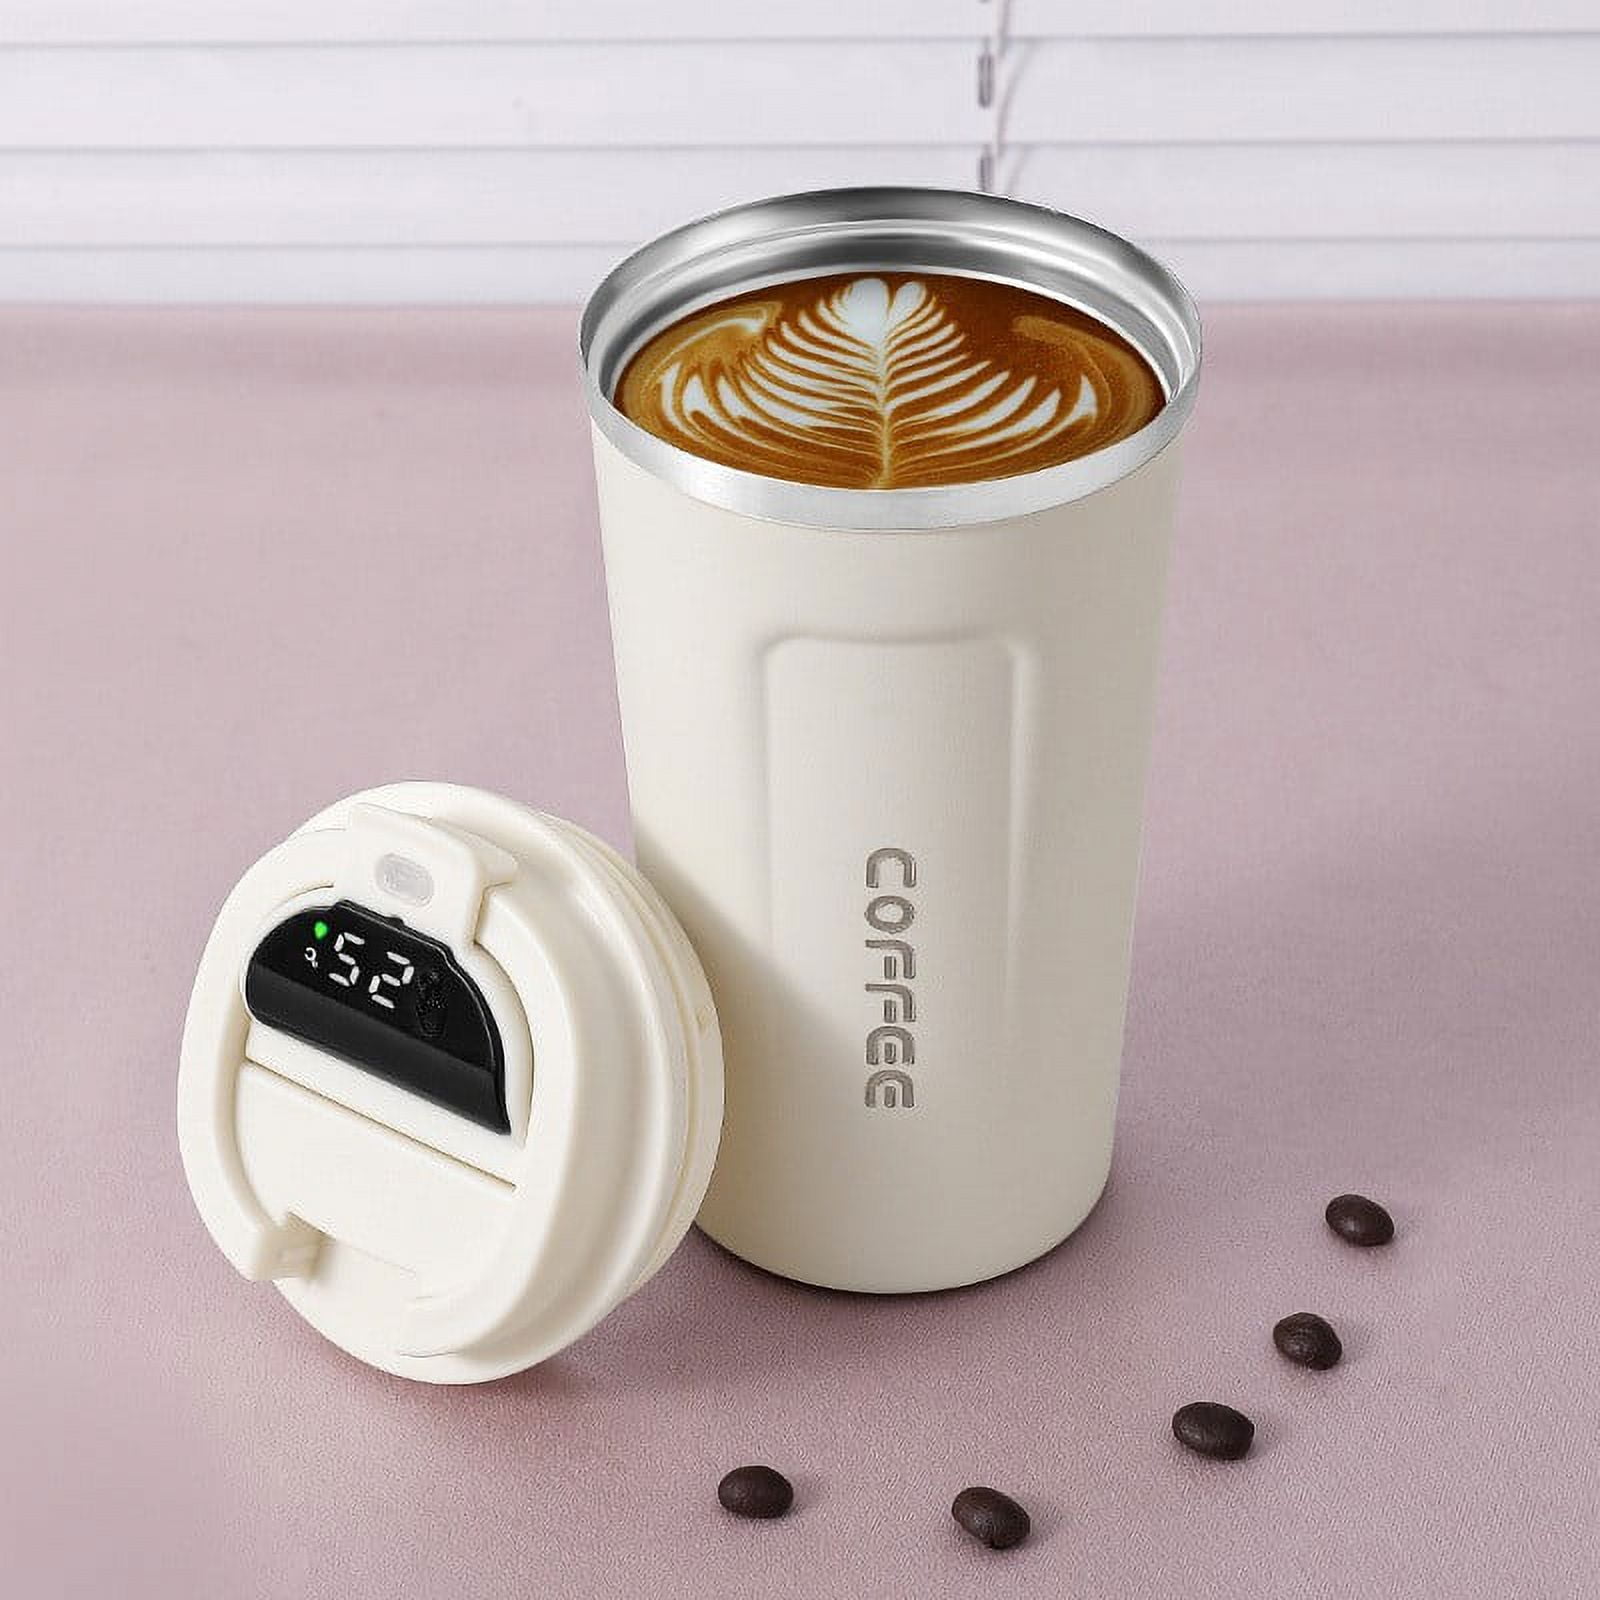 Smart Thermos Coffee Mug LED Temperature Display Thermos Cafe Cup Stainless  Steel Insulated Tumbler Cup Traval Thermos 510ML